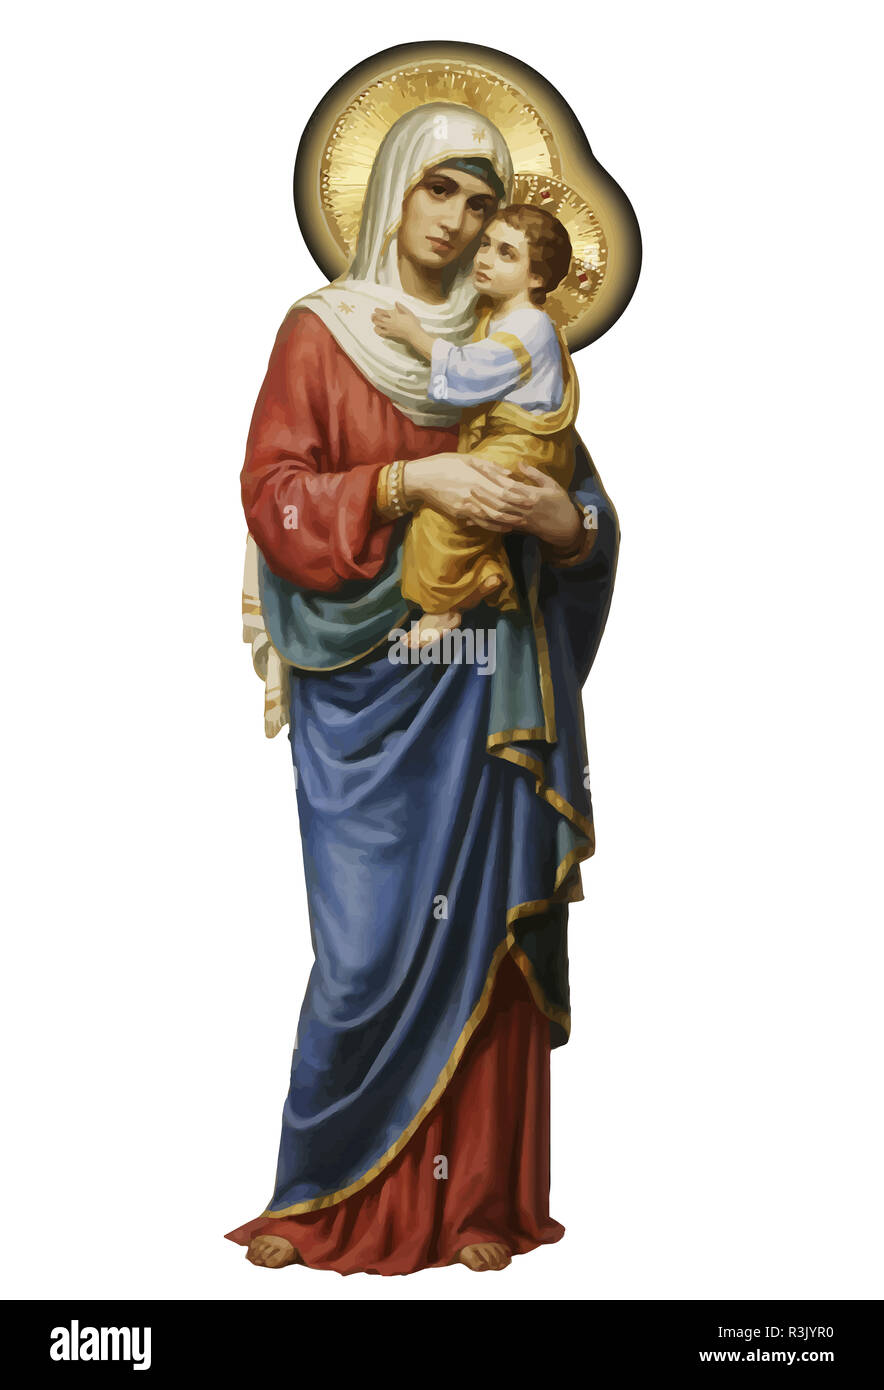 Jesus of nazareth church Cut Out Stock Images & Pictures - Alamy